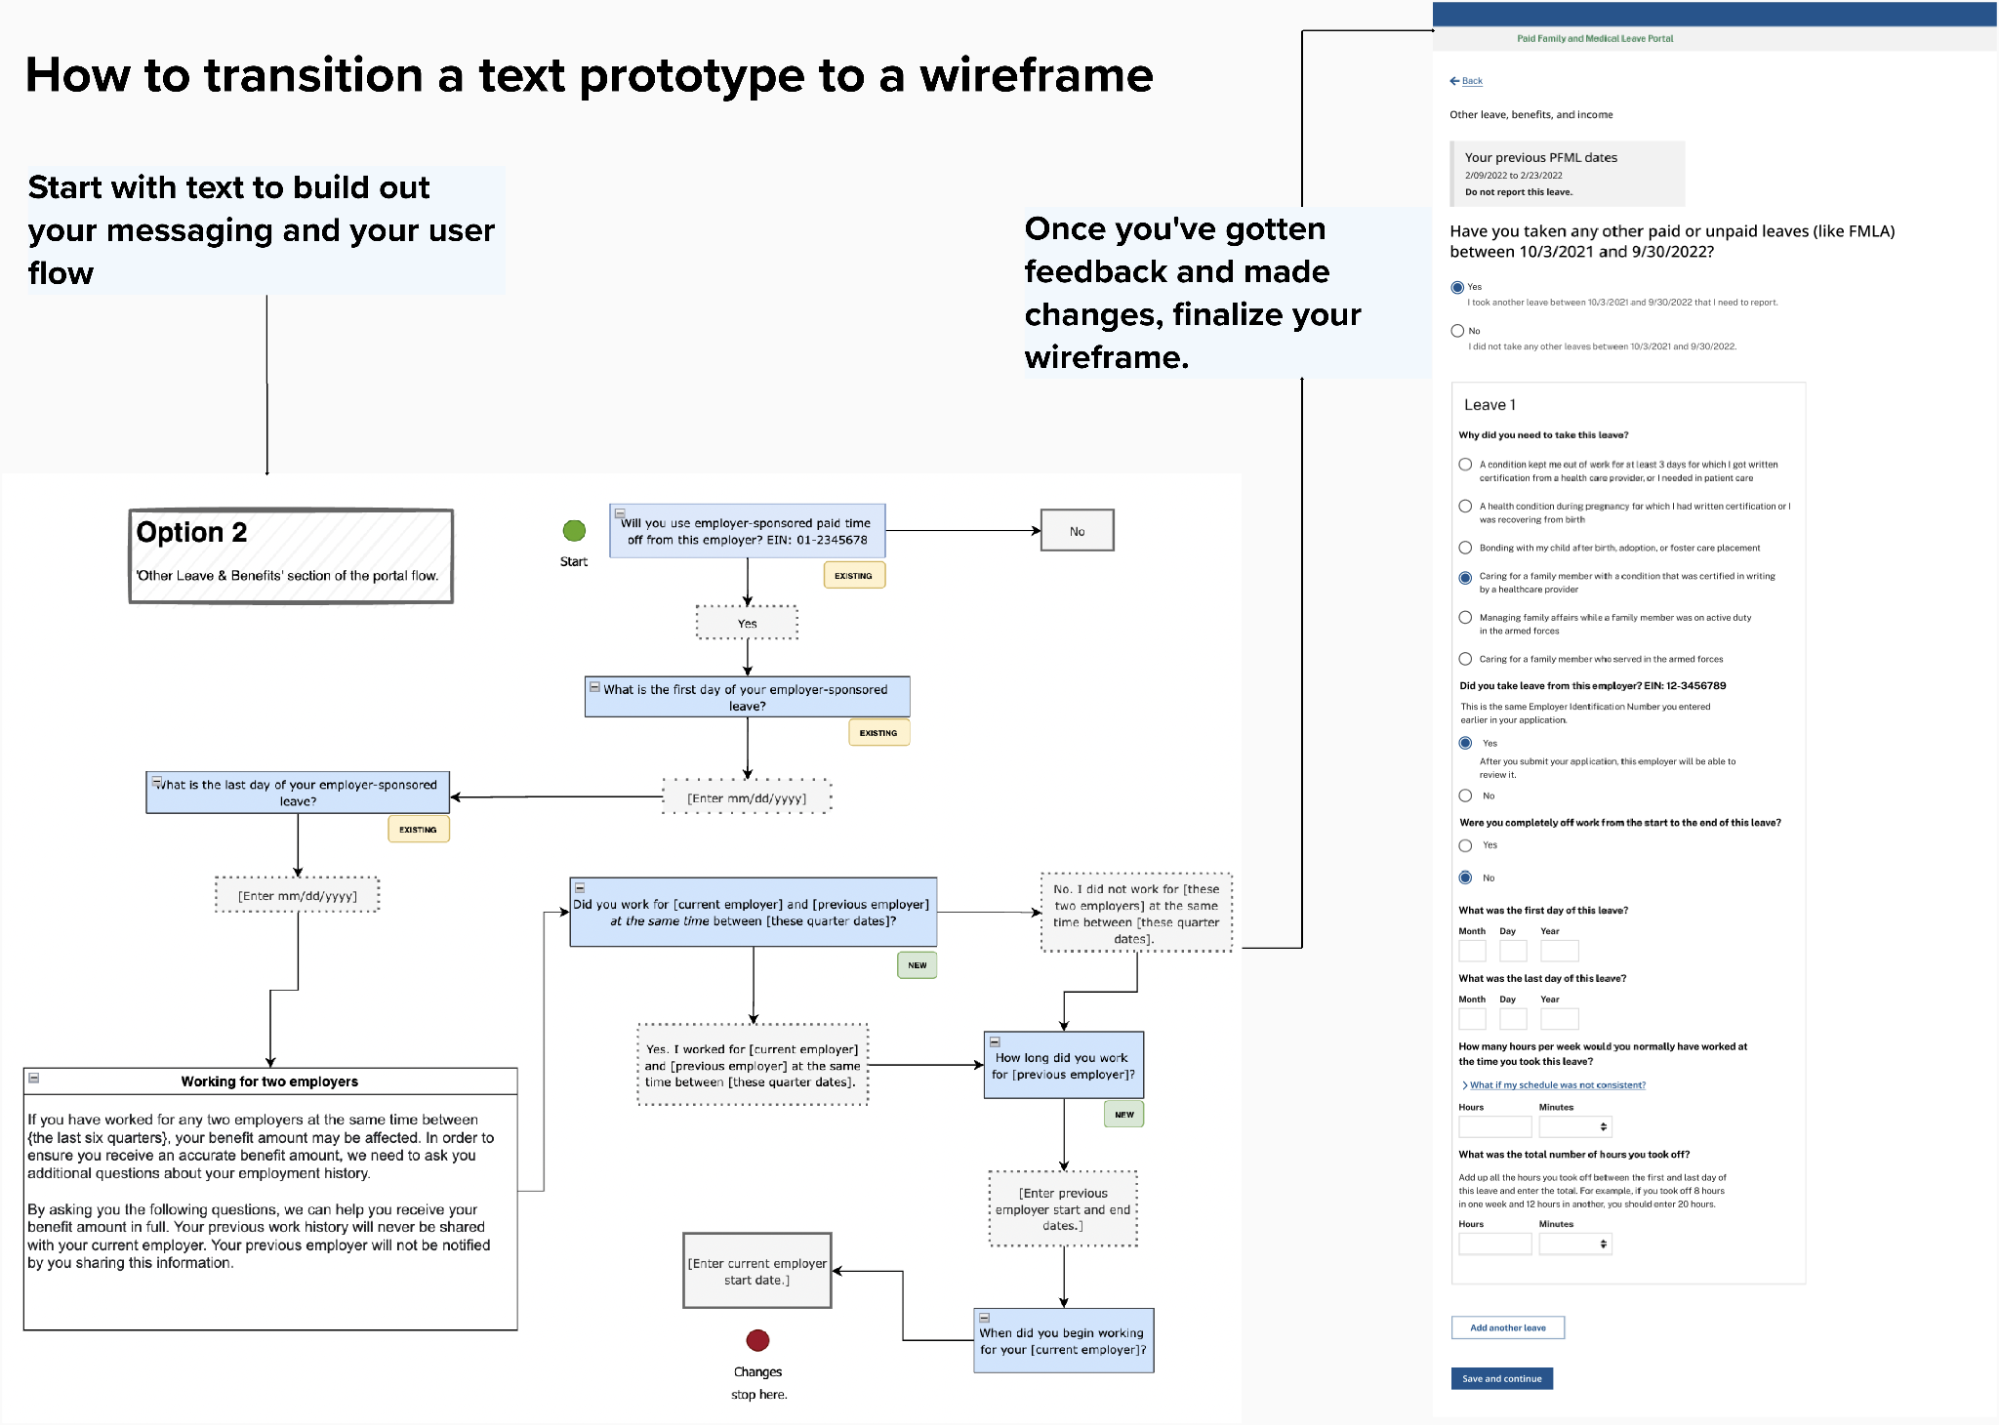 A diagram showing how to transition a text prototype to a wireframe.